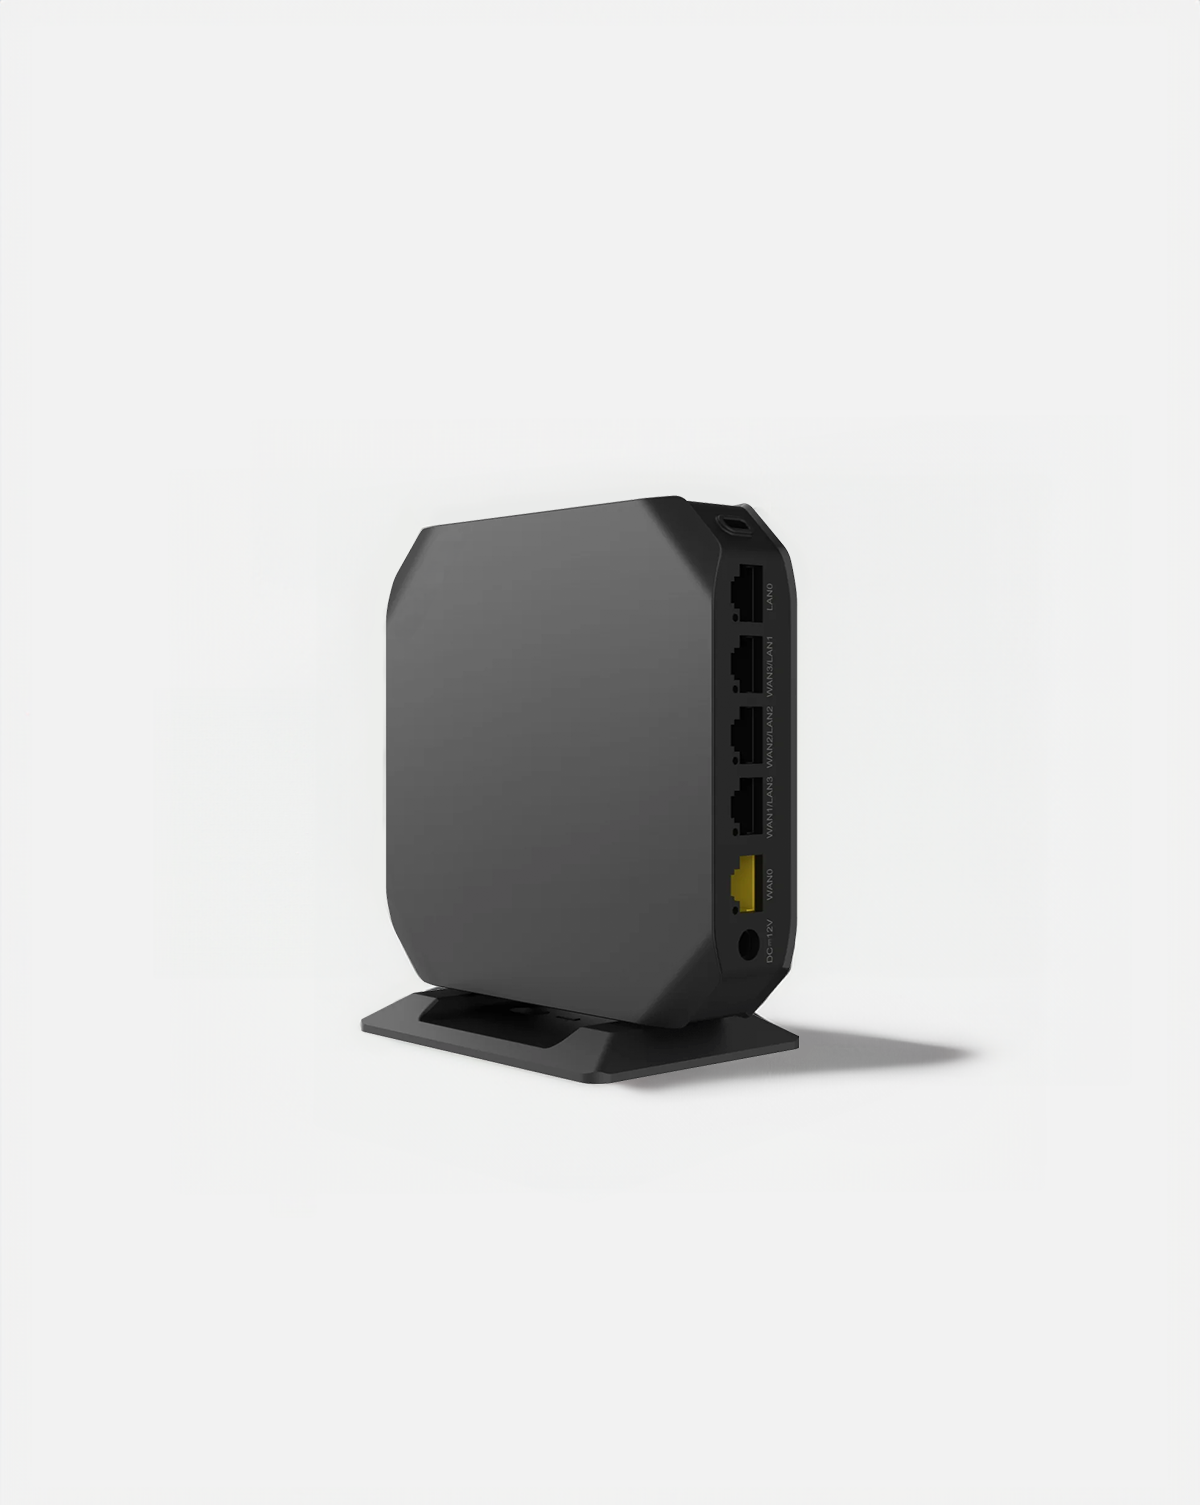 Router - AC1300 5-port Gigabit (All-in-one- wireless router)